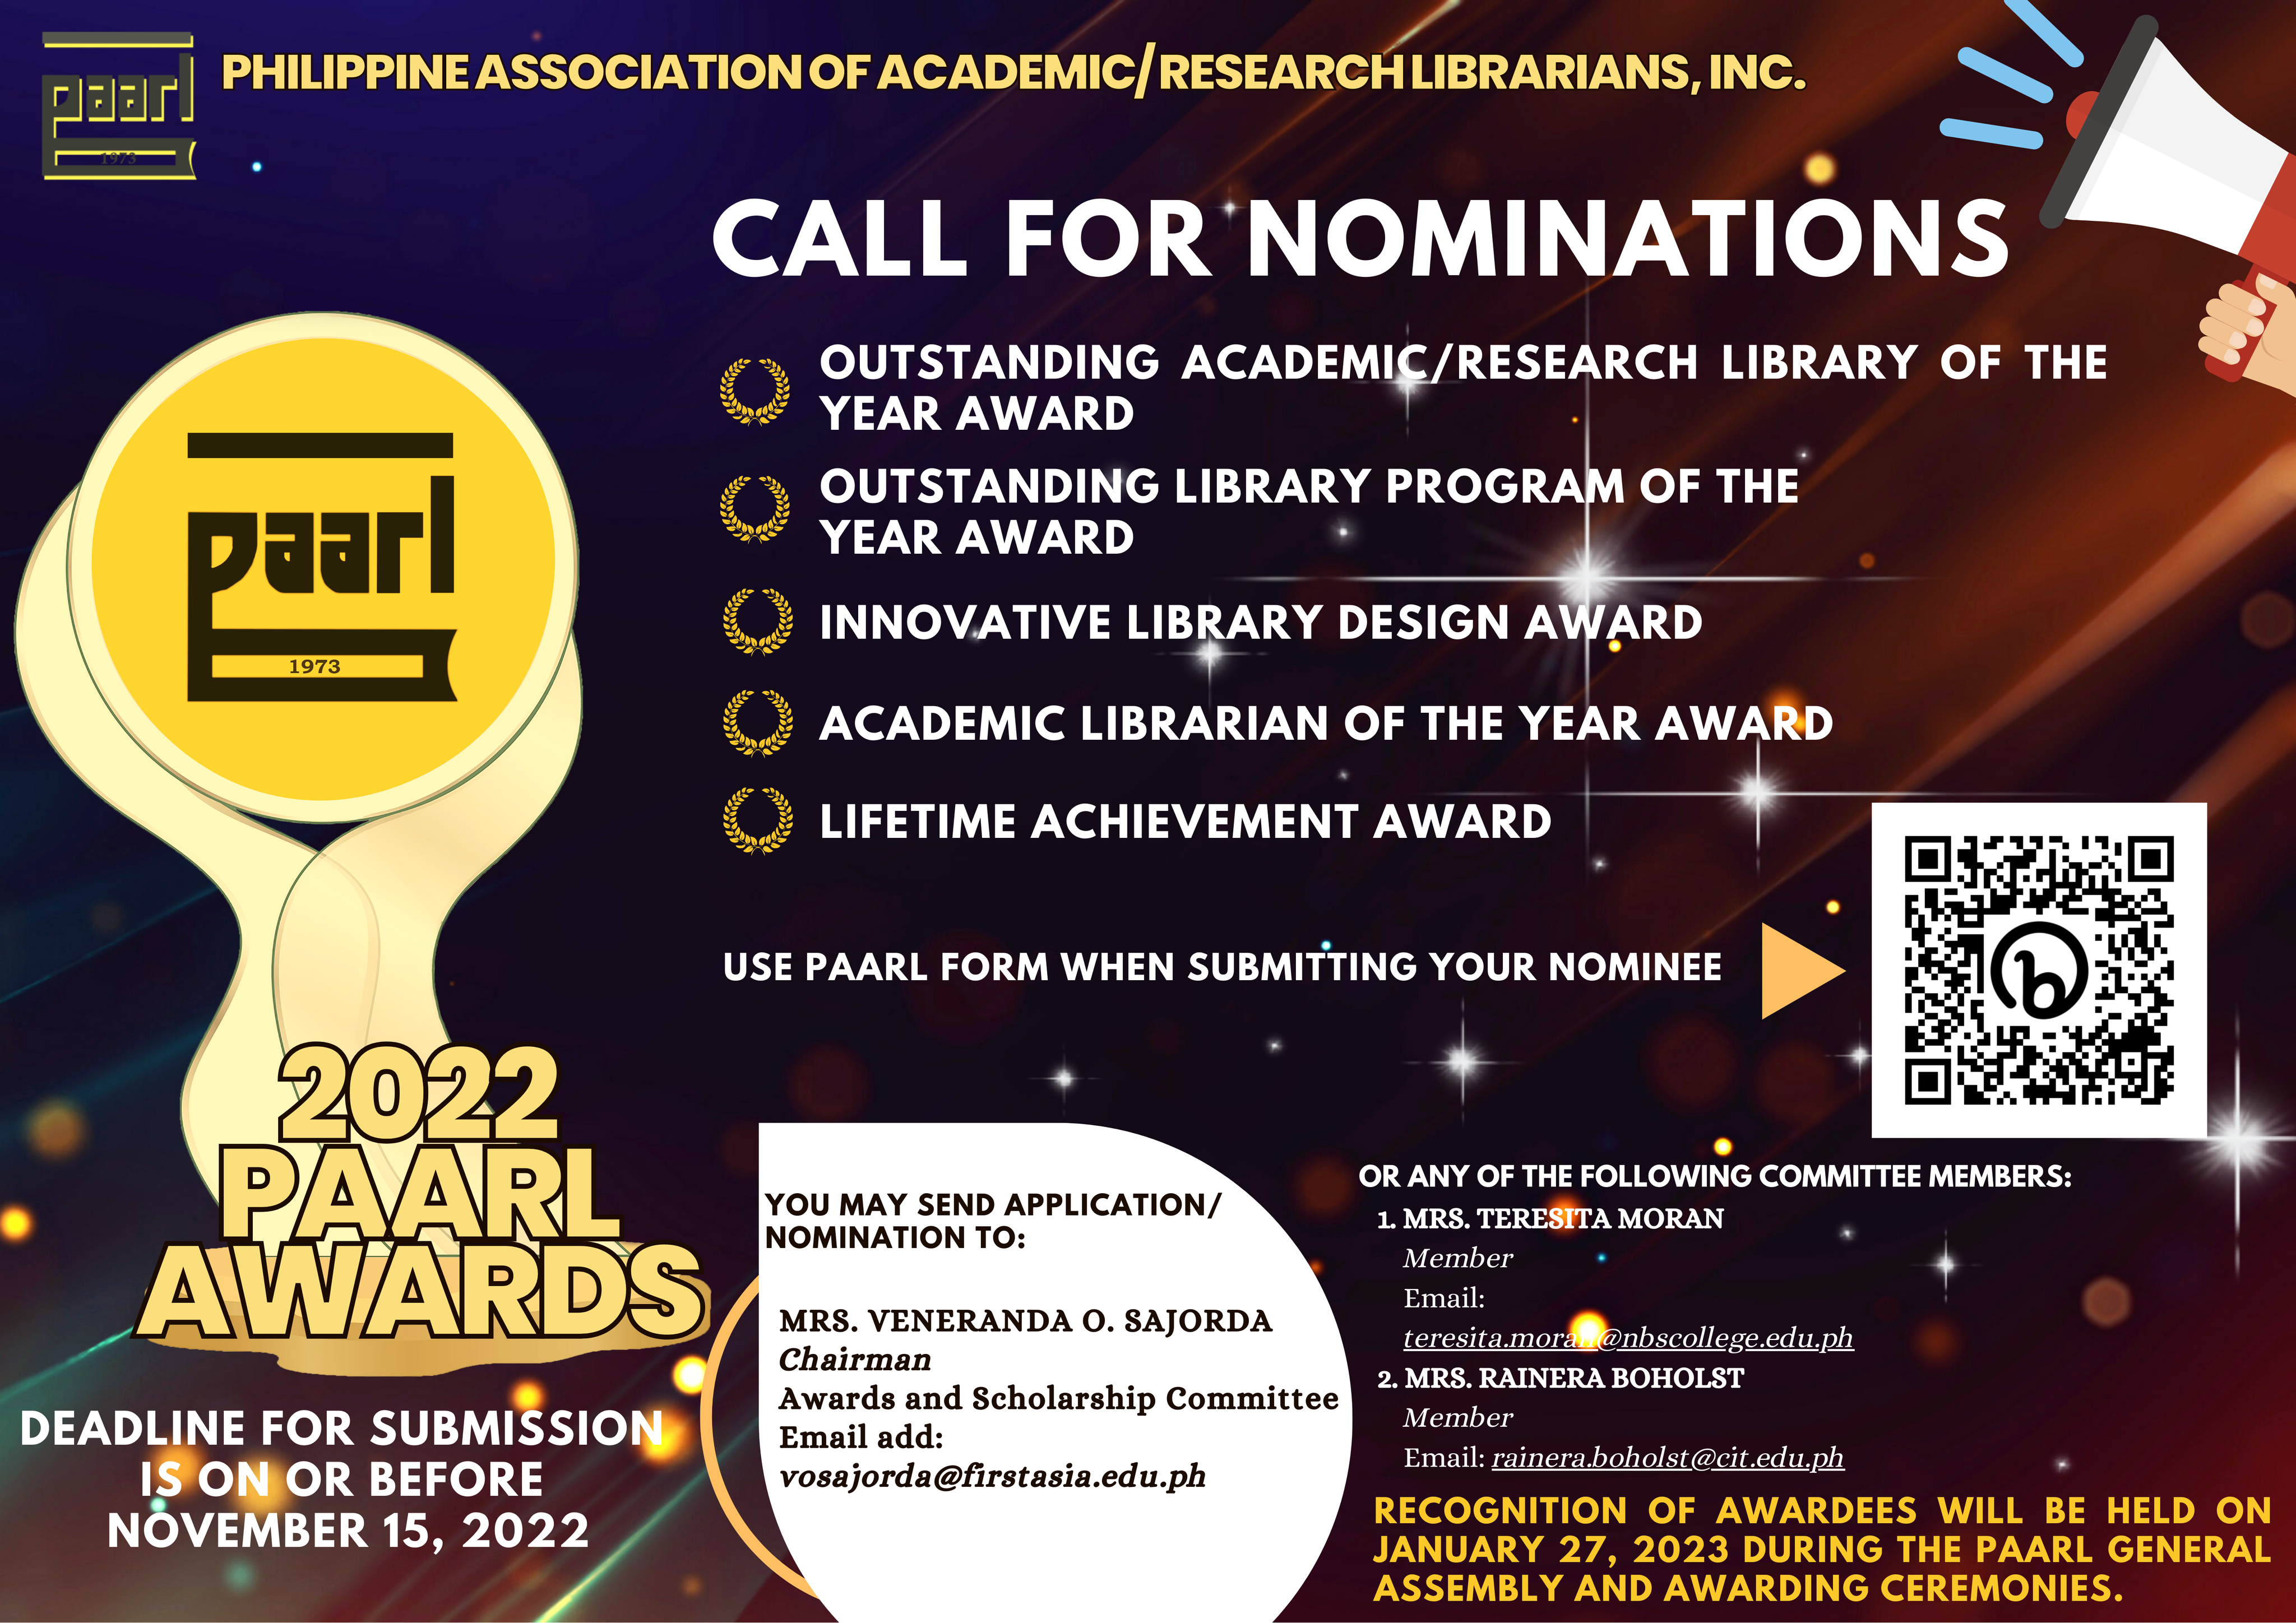 CALL FOR NOMINATIONS 2022 PAARL AWARDS